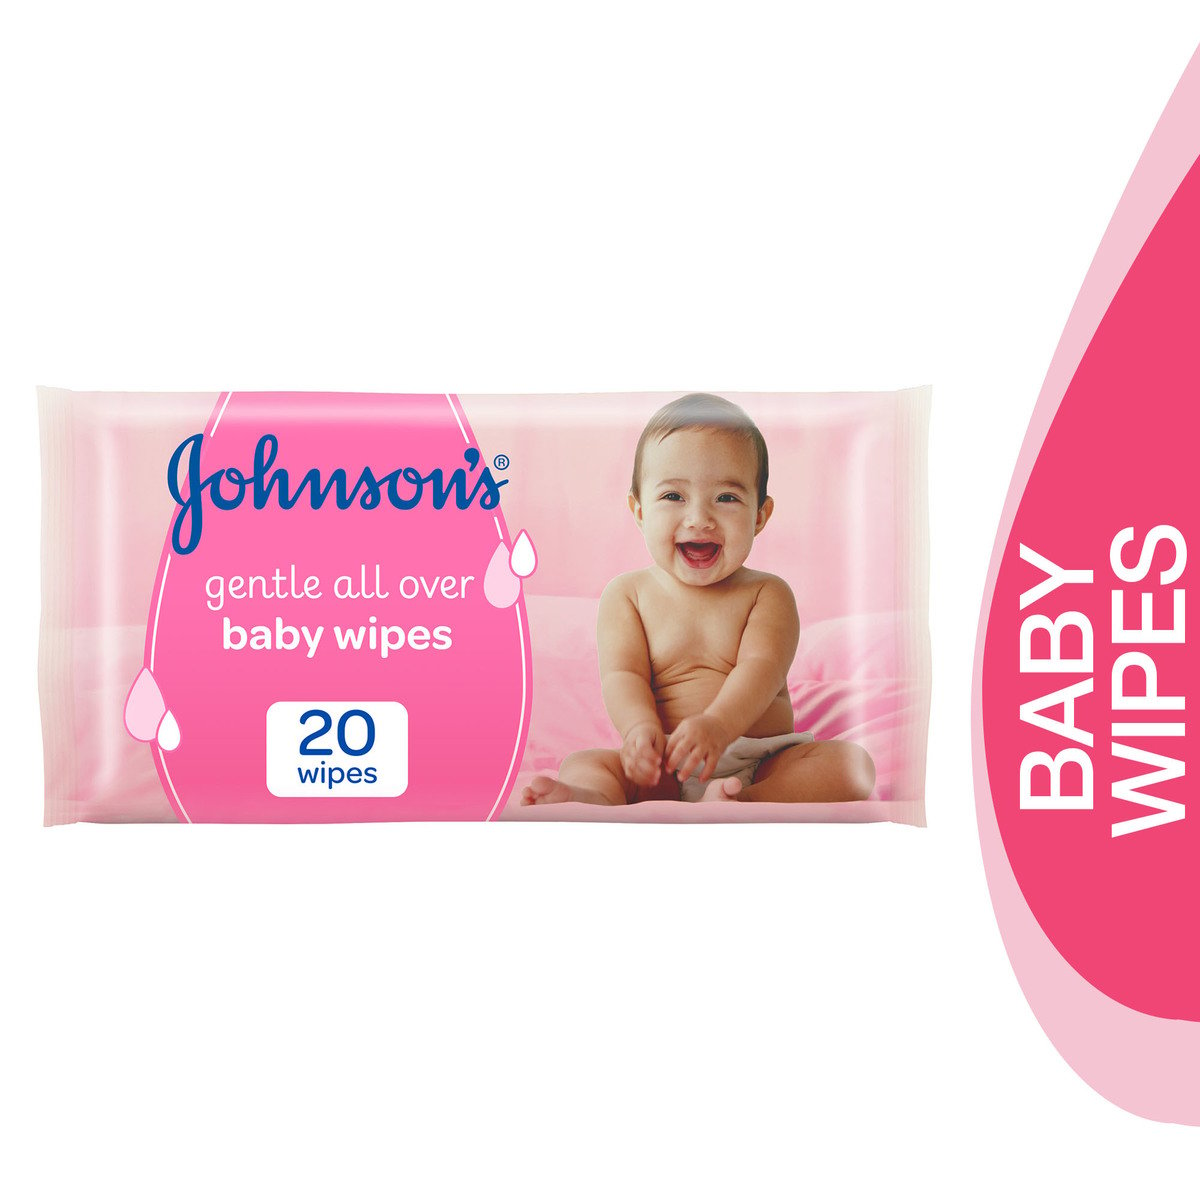 Johnson's Baby Wipes Gentle All Over 20pcs